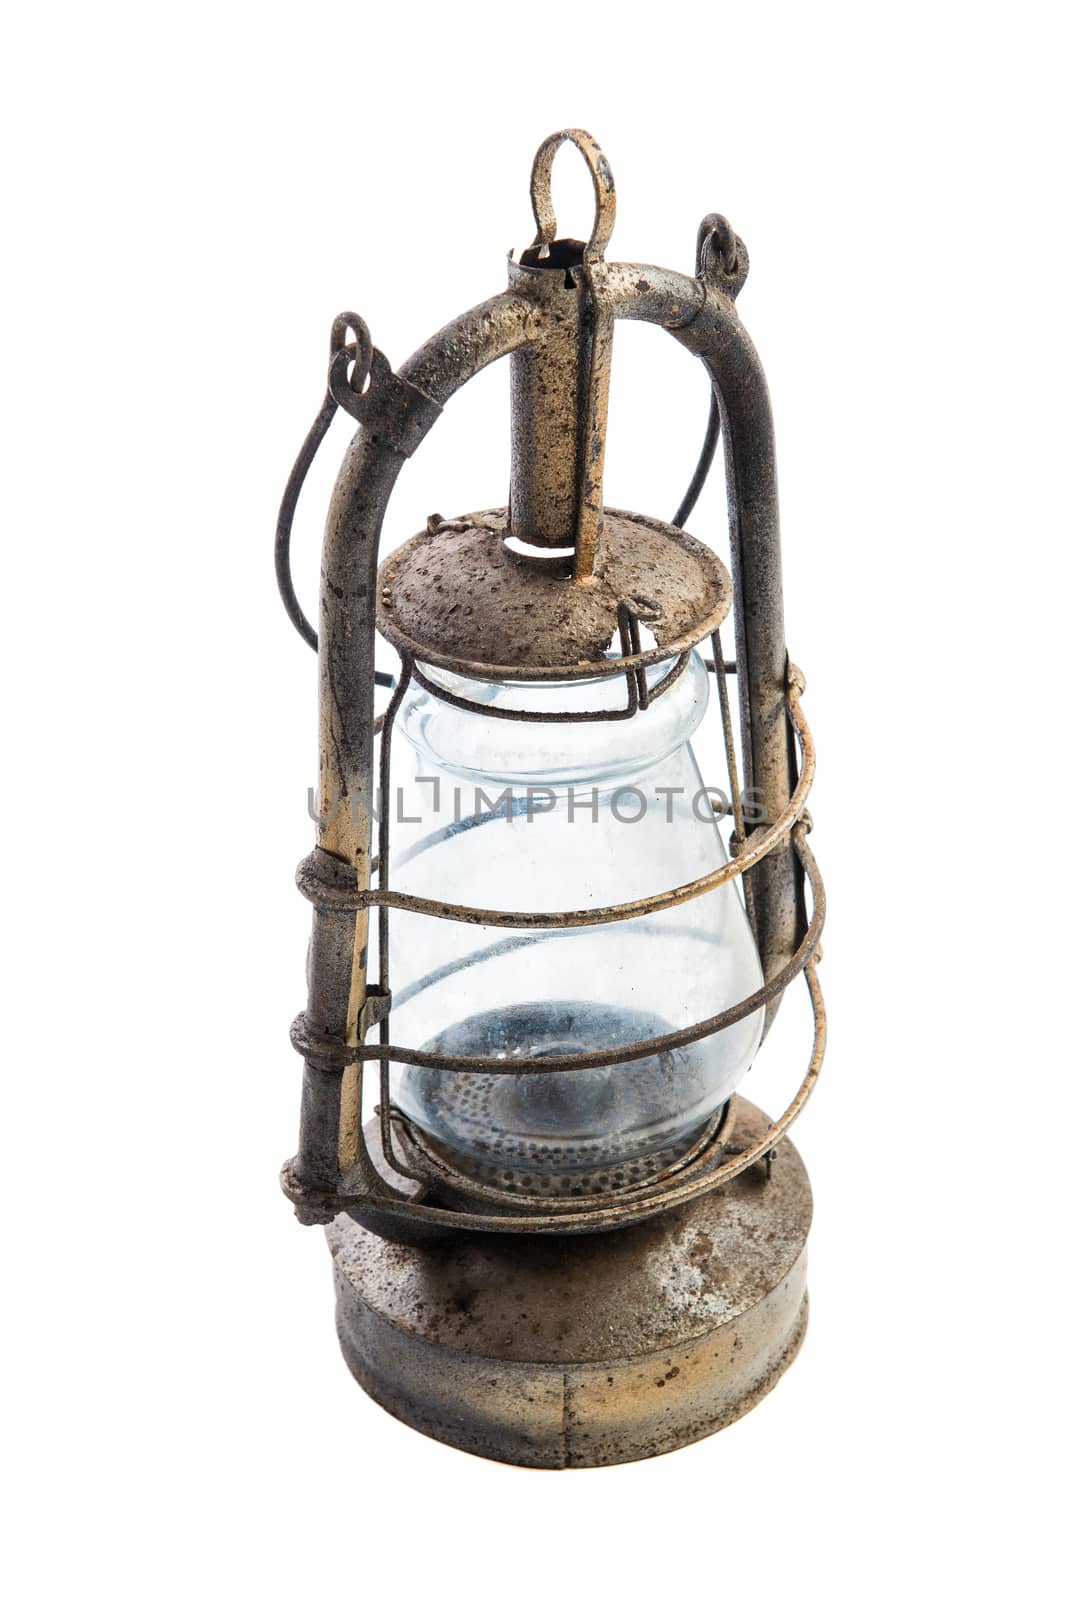 Old classic rustic oil lamp on white background by Draw05